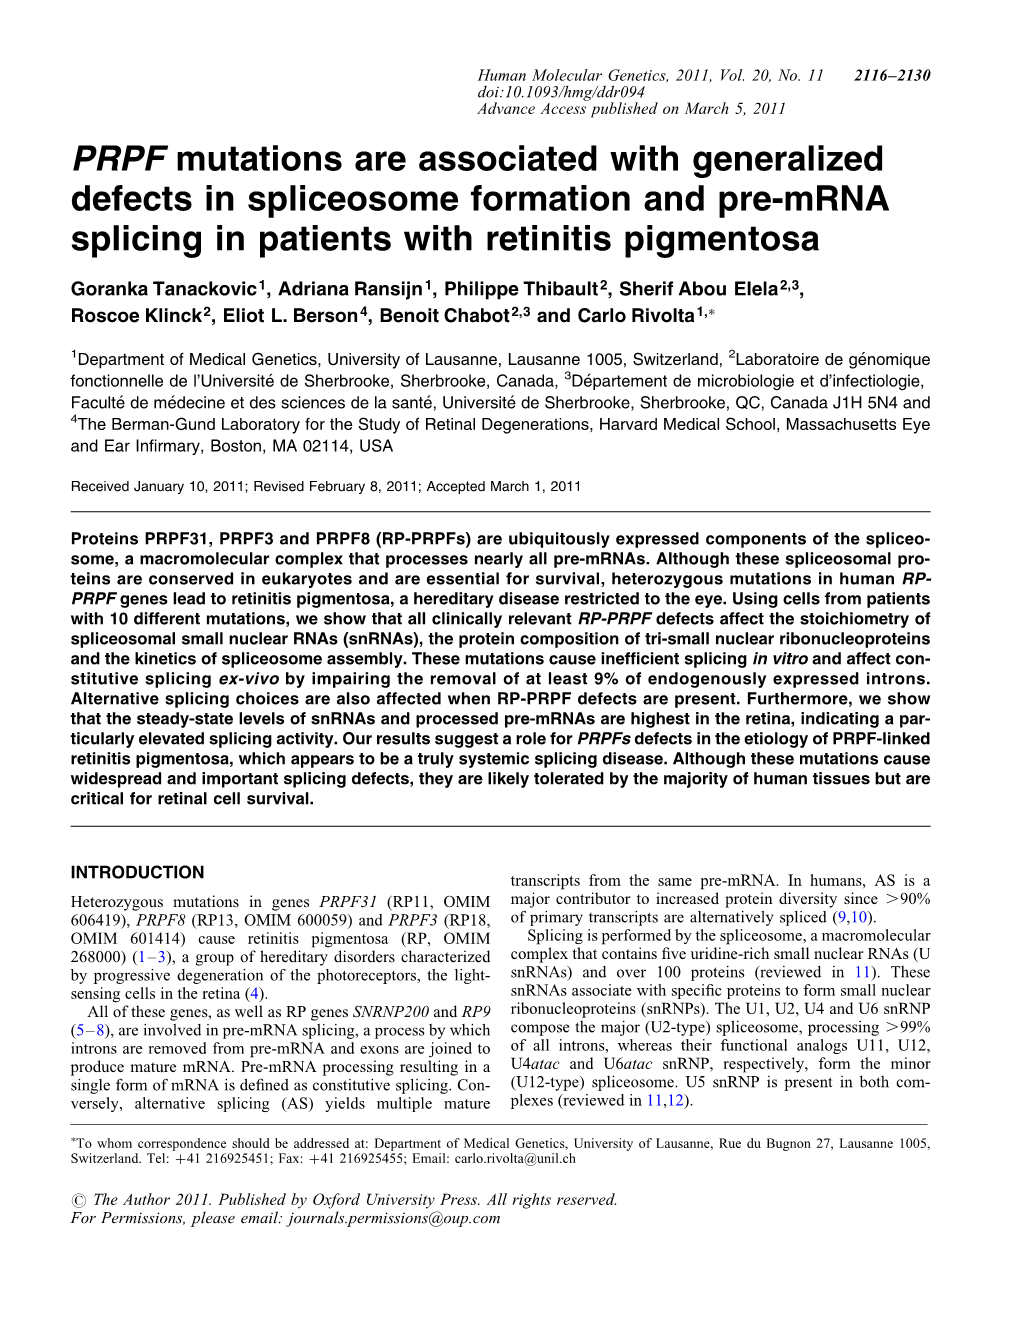 PRPF Mutations Are Associated with Generalized Defects in Spliceosome Formation and Pre-Mrna Splicing in Patients with Retinitis Pigmentosa